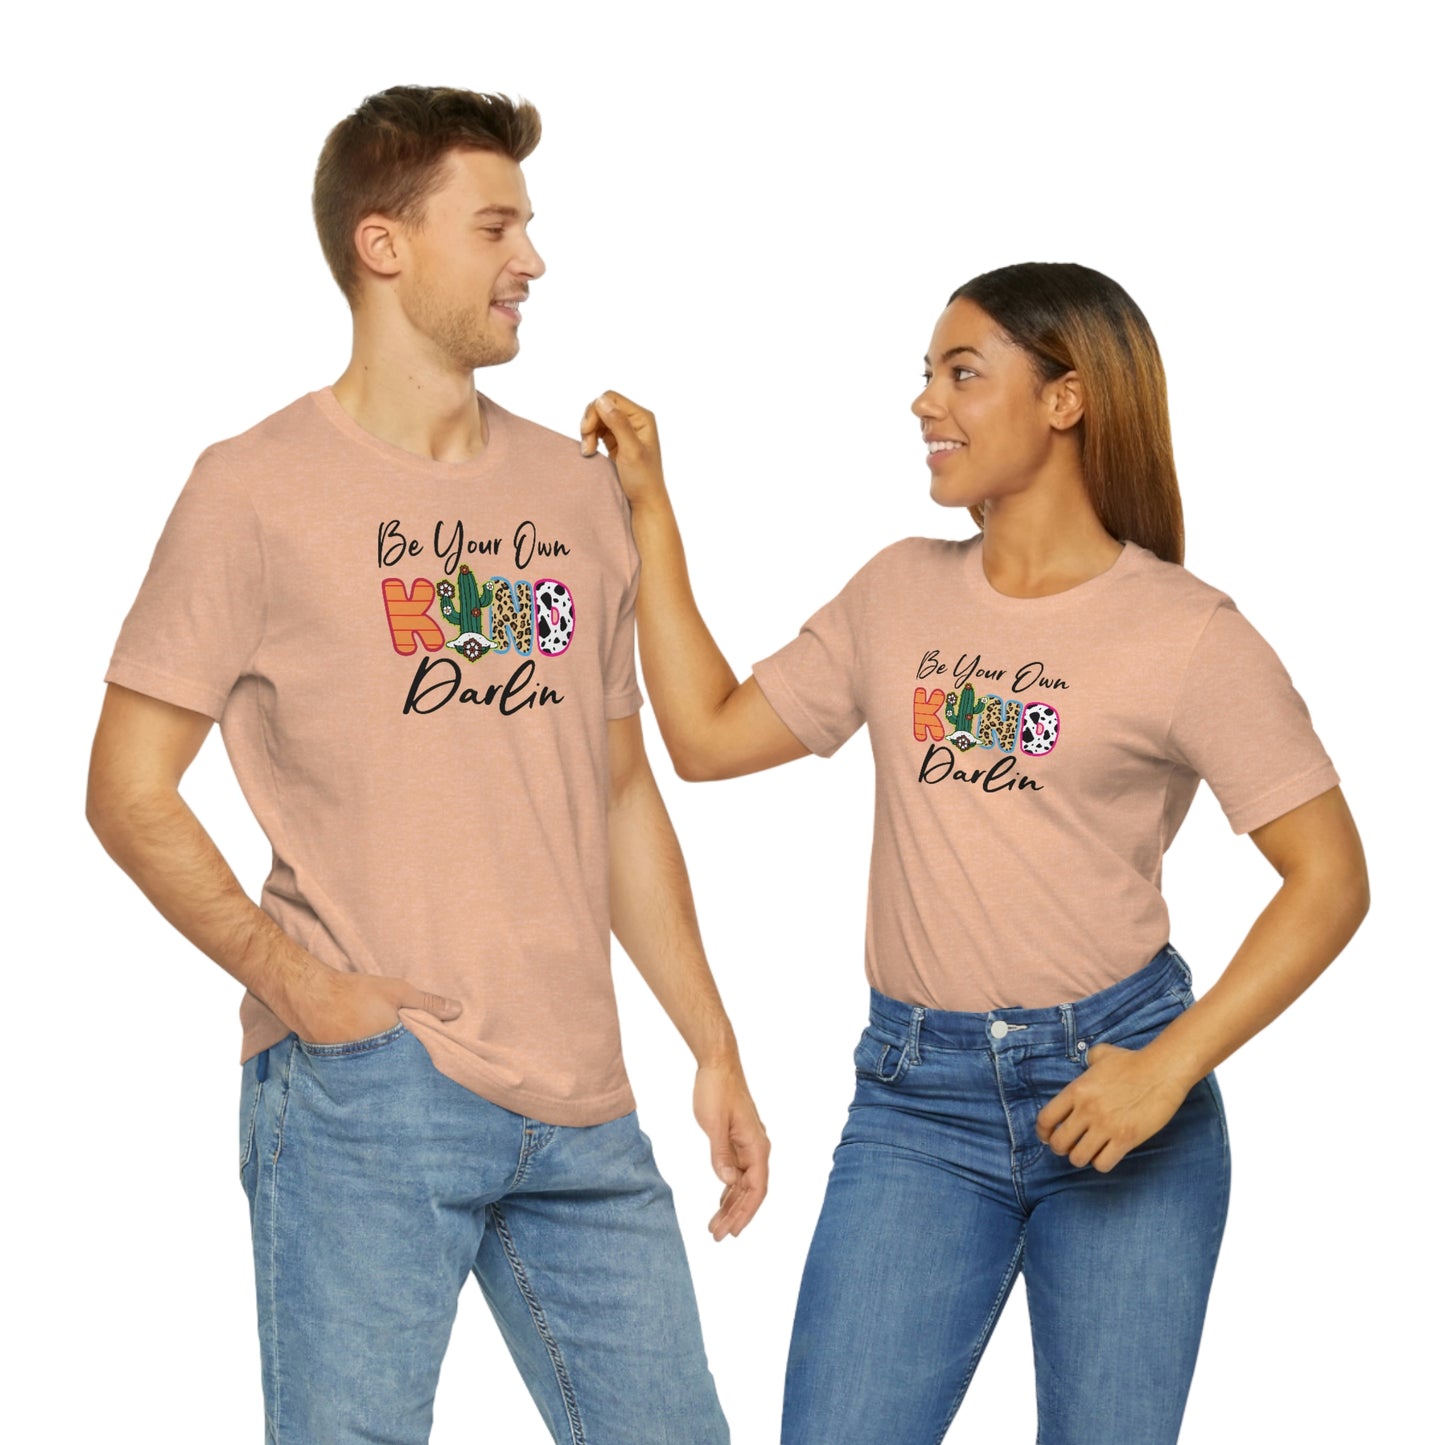 Be Your Own Kind Darling Shirt